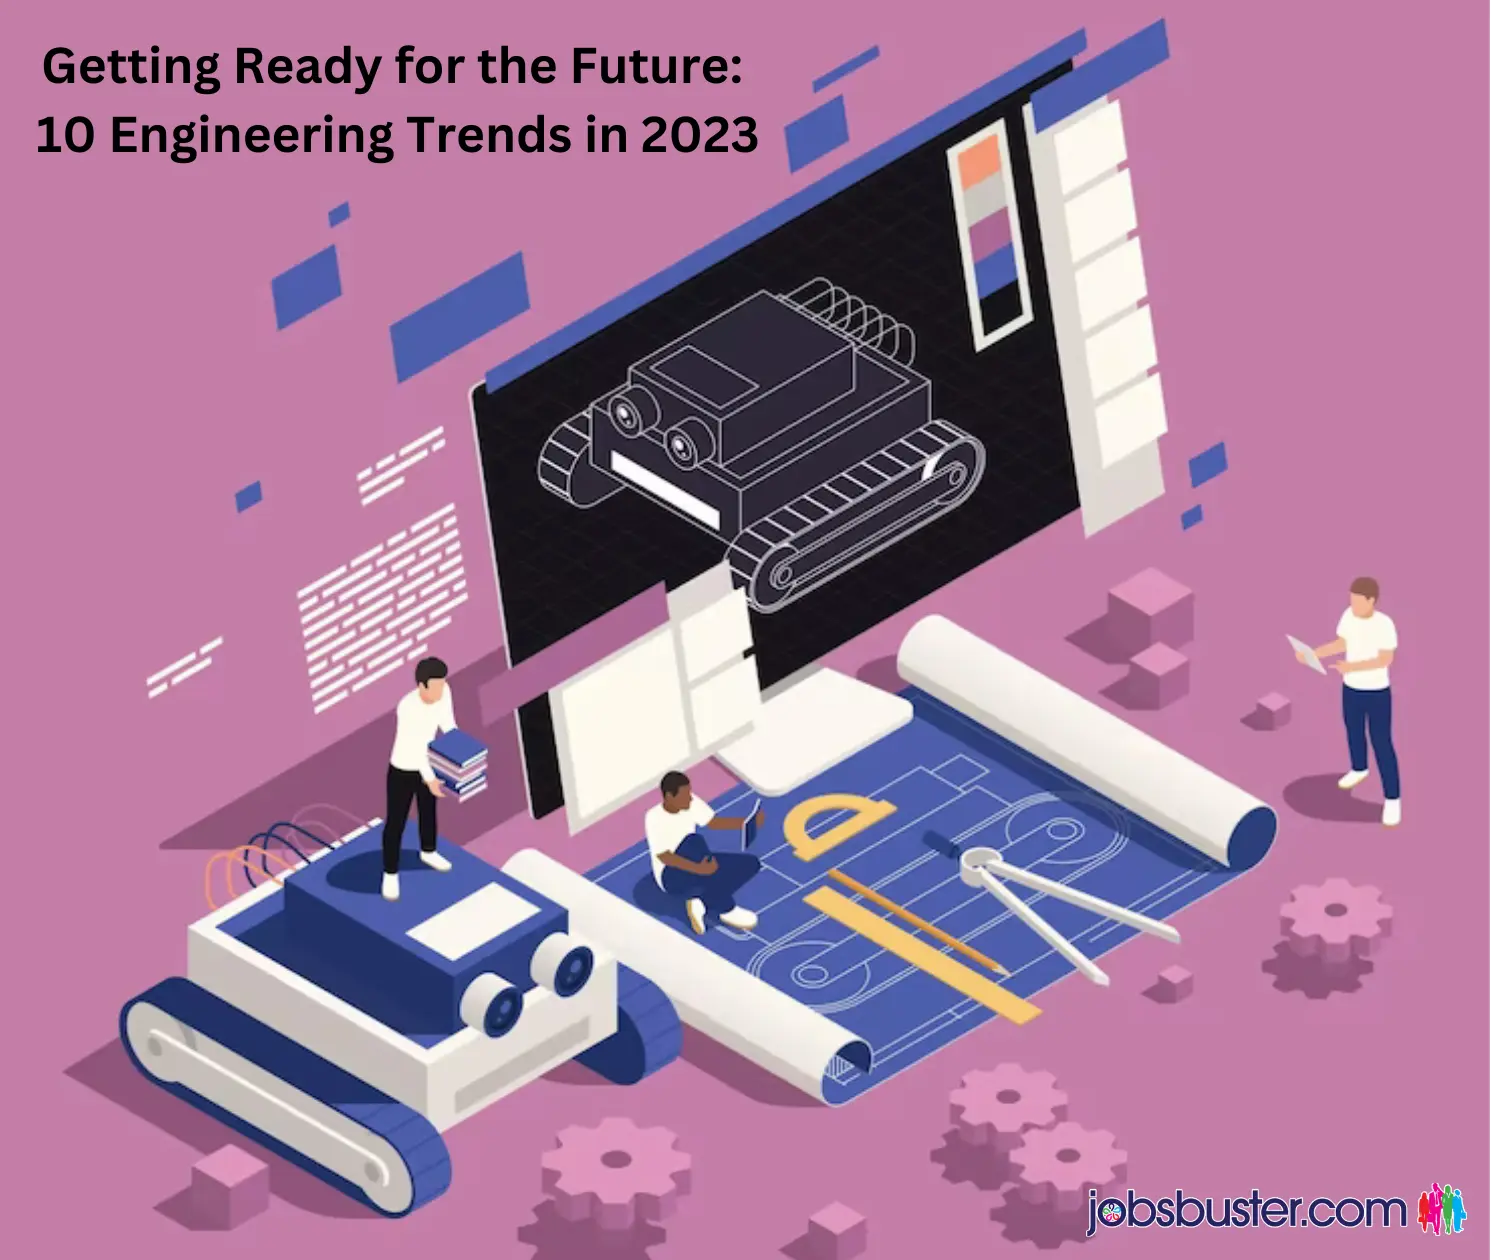 Getting Ready for the Future: 10 Engineering Trends in 2023